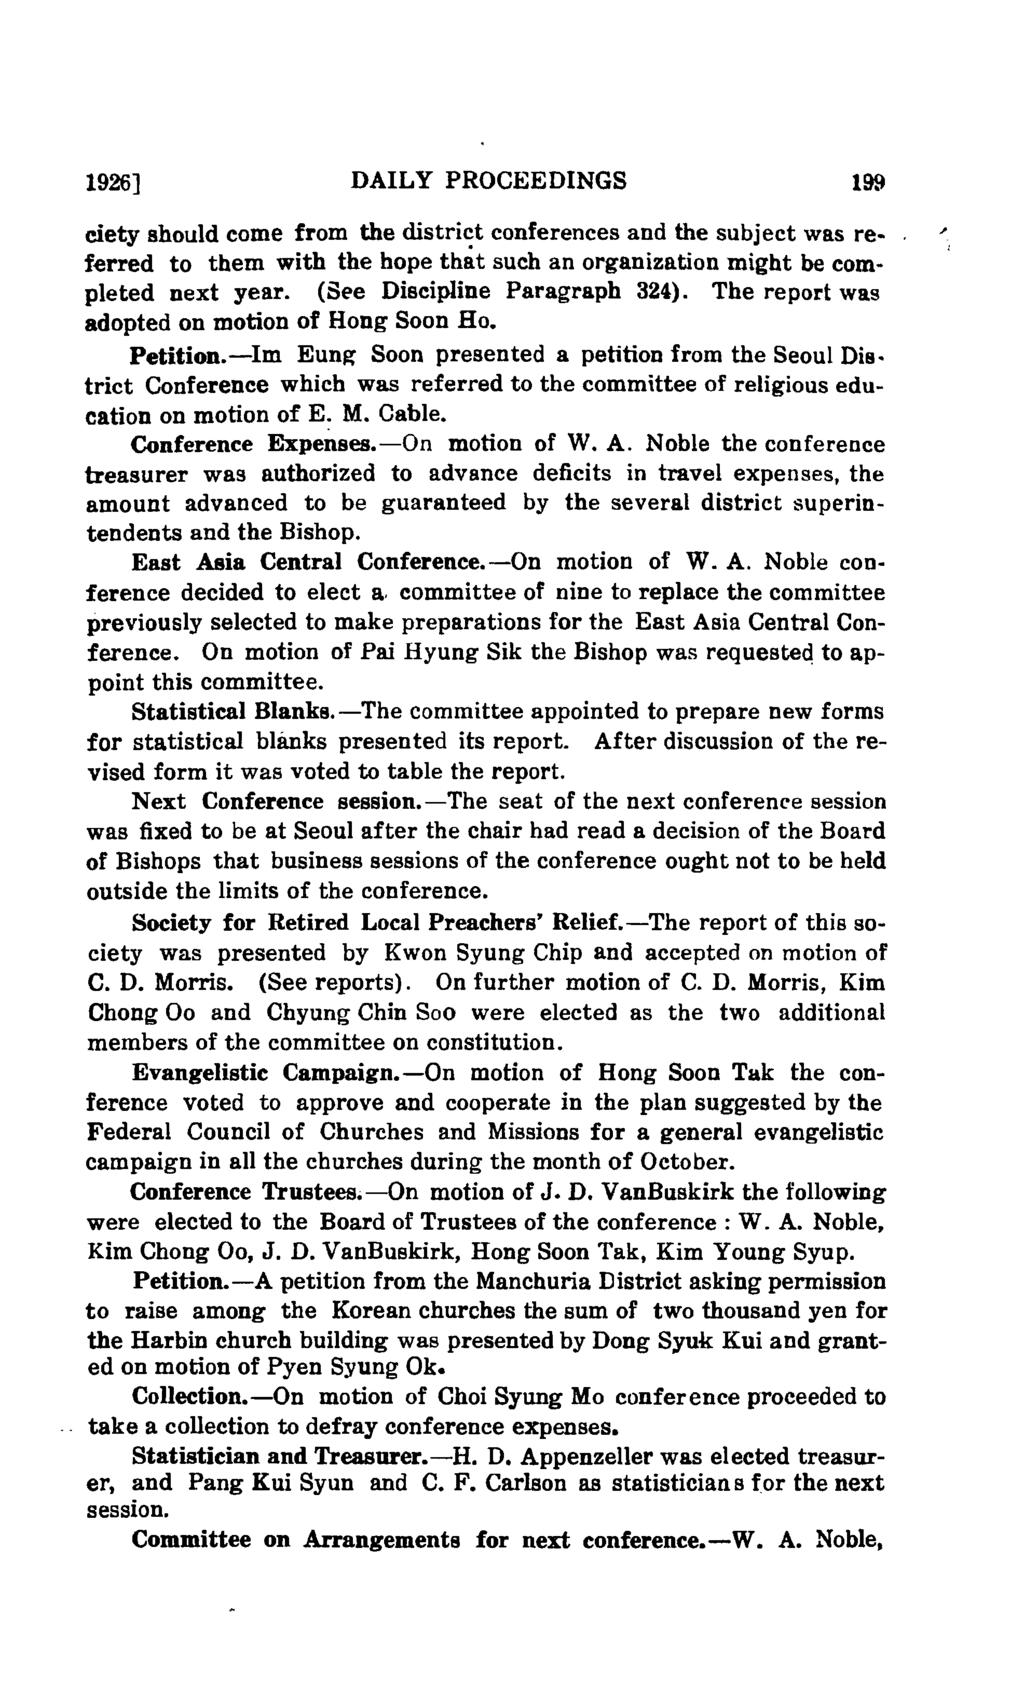 1926] DAILY PROCEEDINGS 199 ciety should come from the district conferences and the subject was re ferred to them with the hope that such an organization might be completed next year.